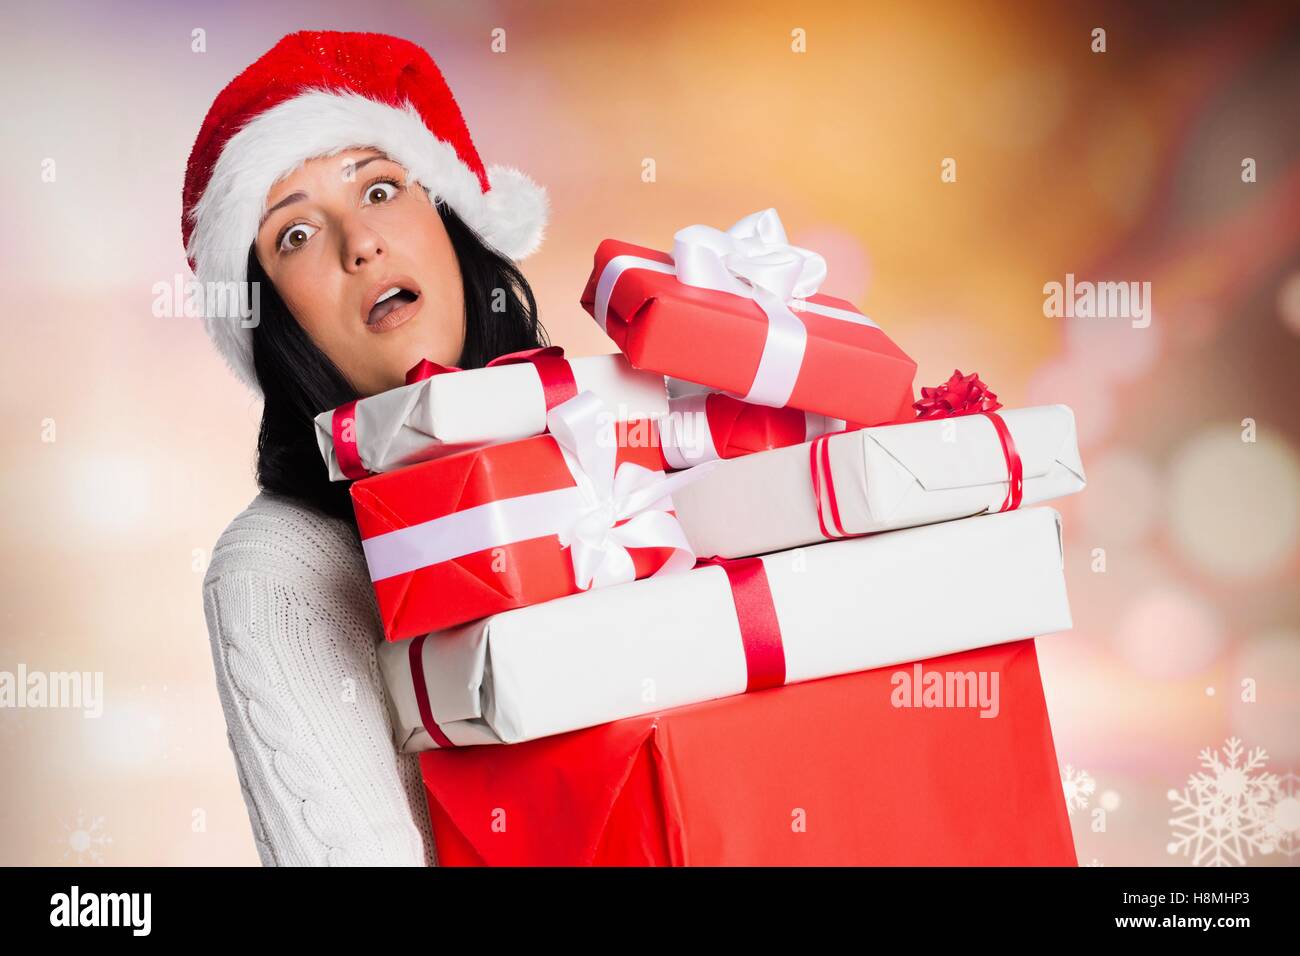 Tired woman holding gift boxes Stock Photo